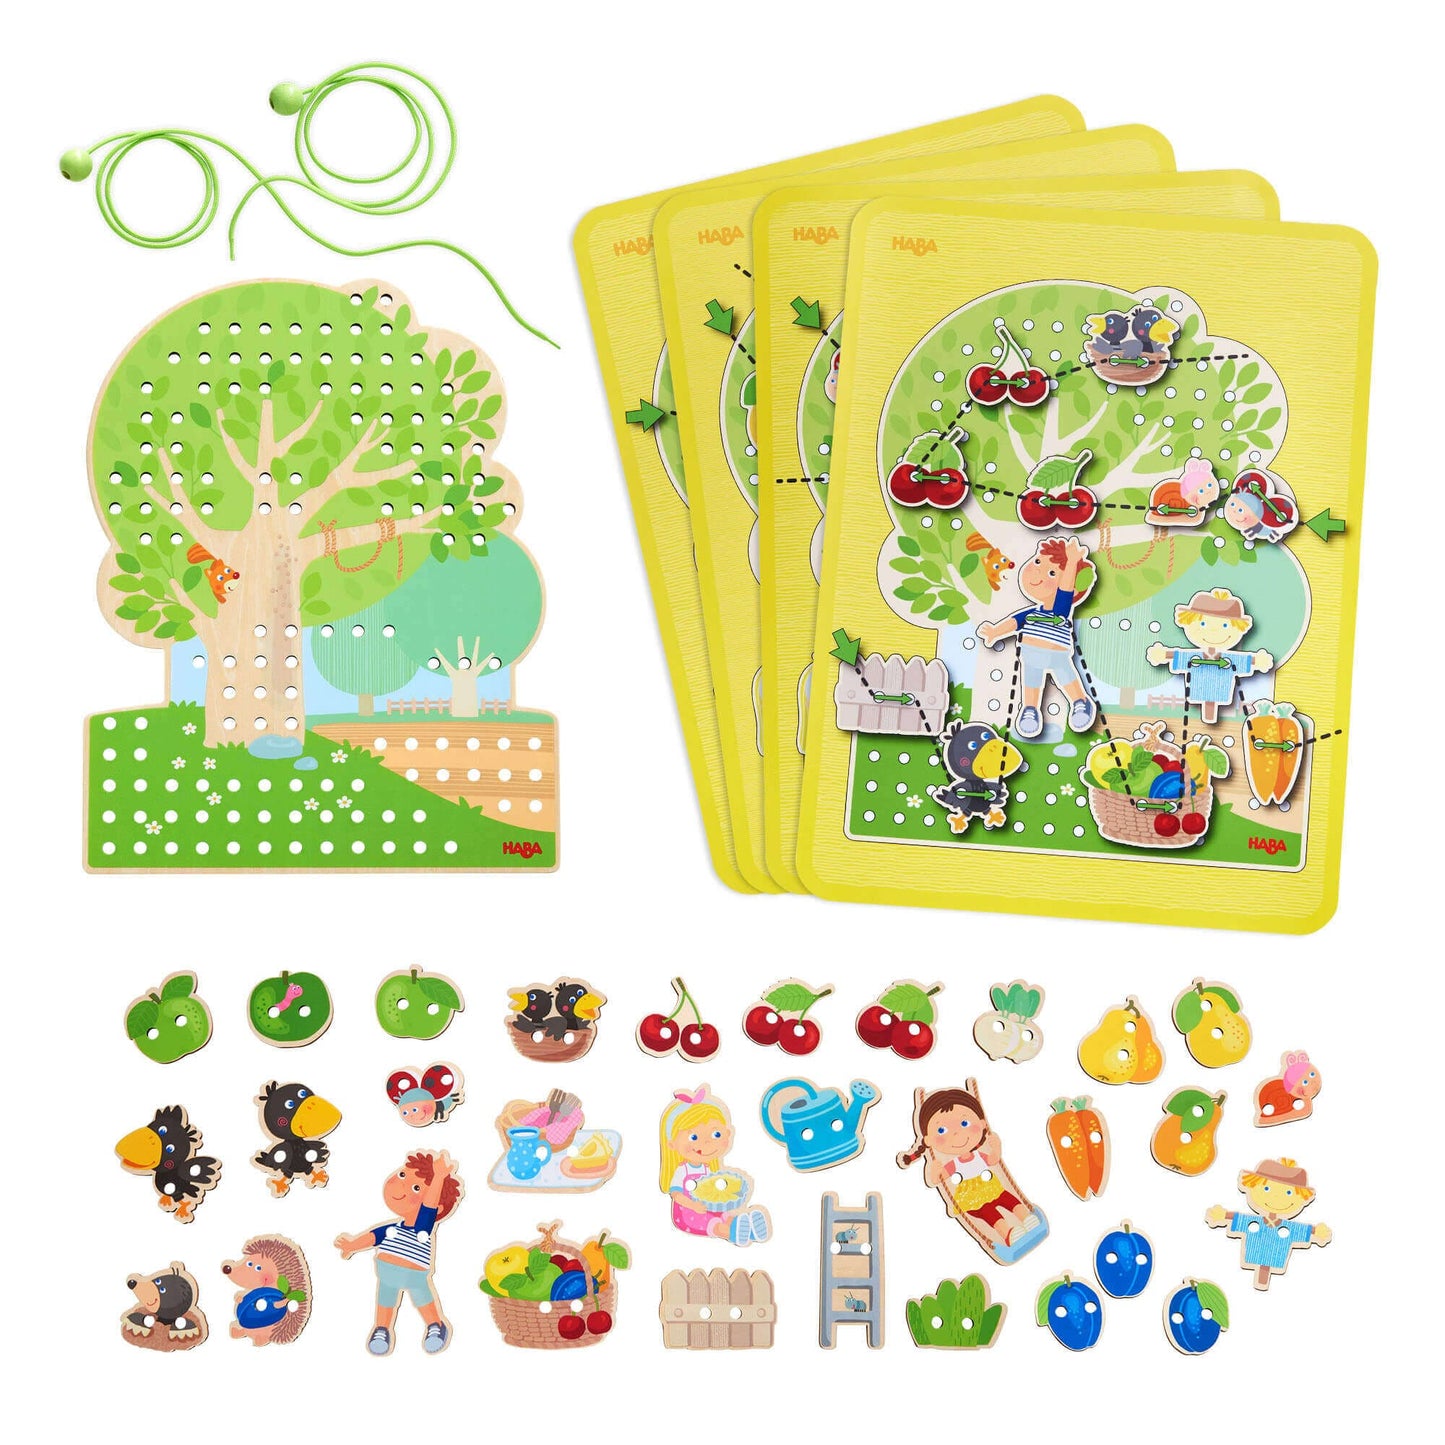 Orchard 31 Piece Threading Game